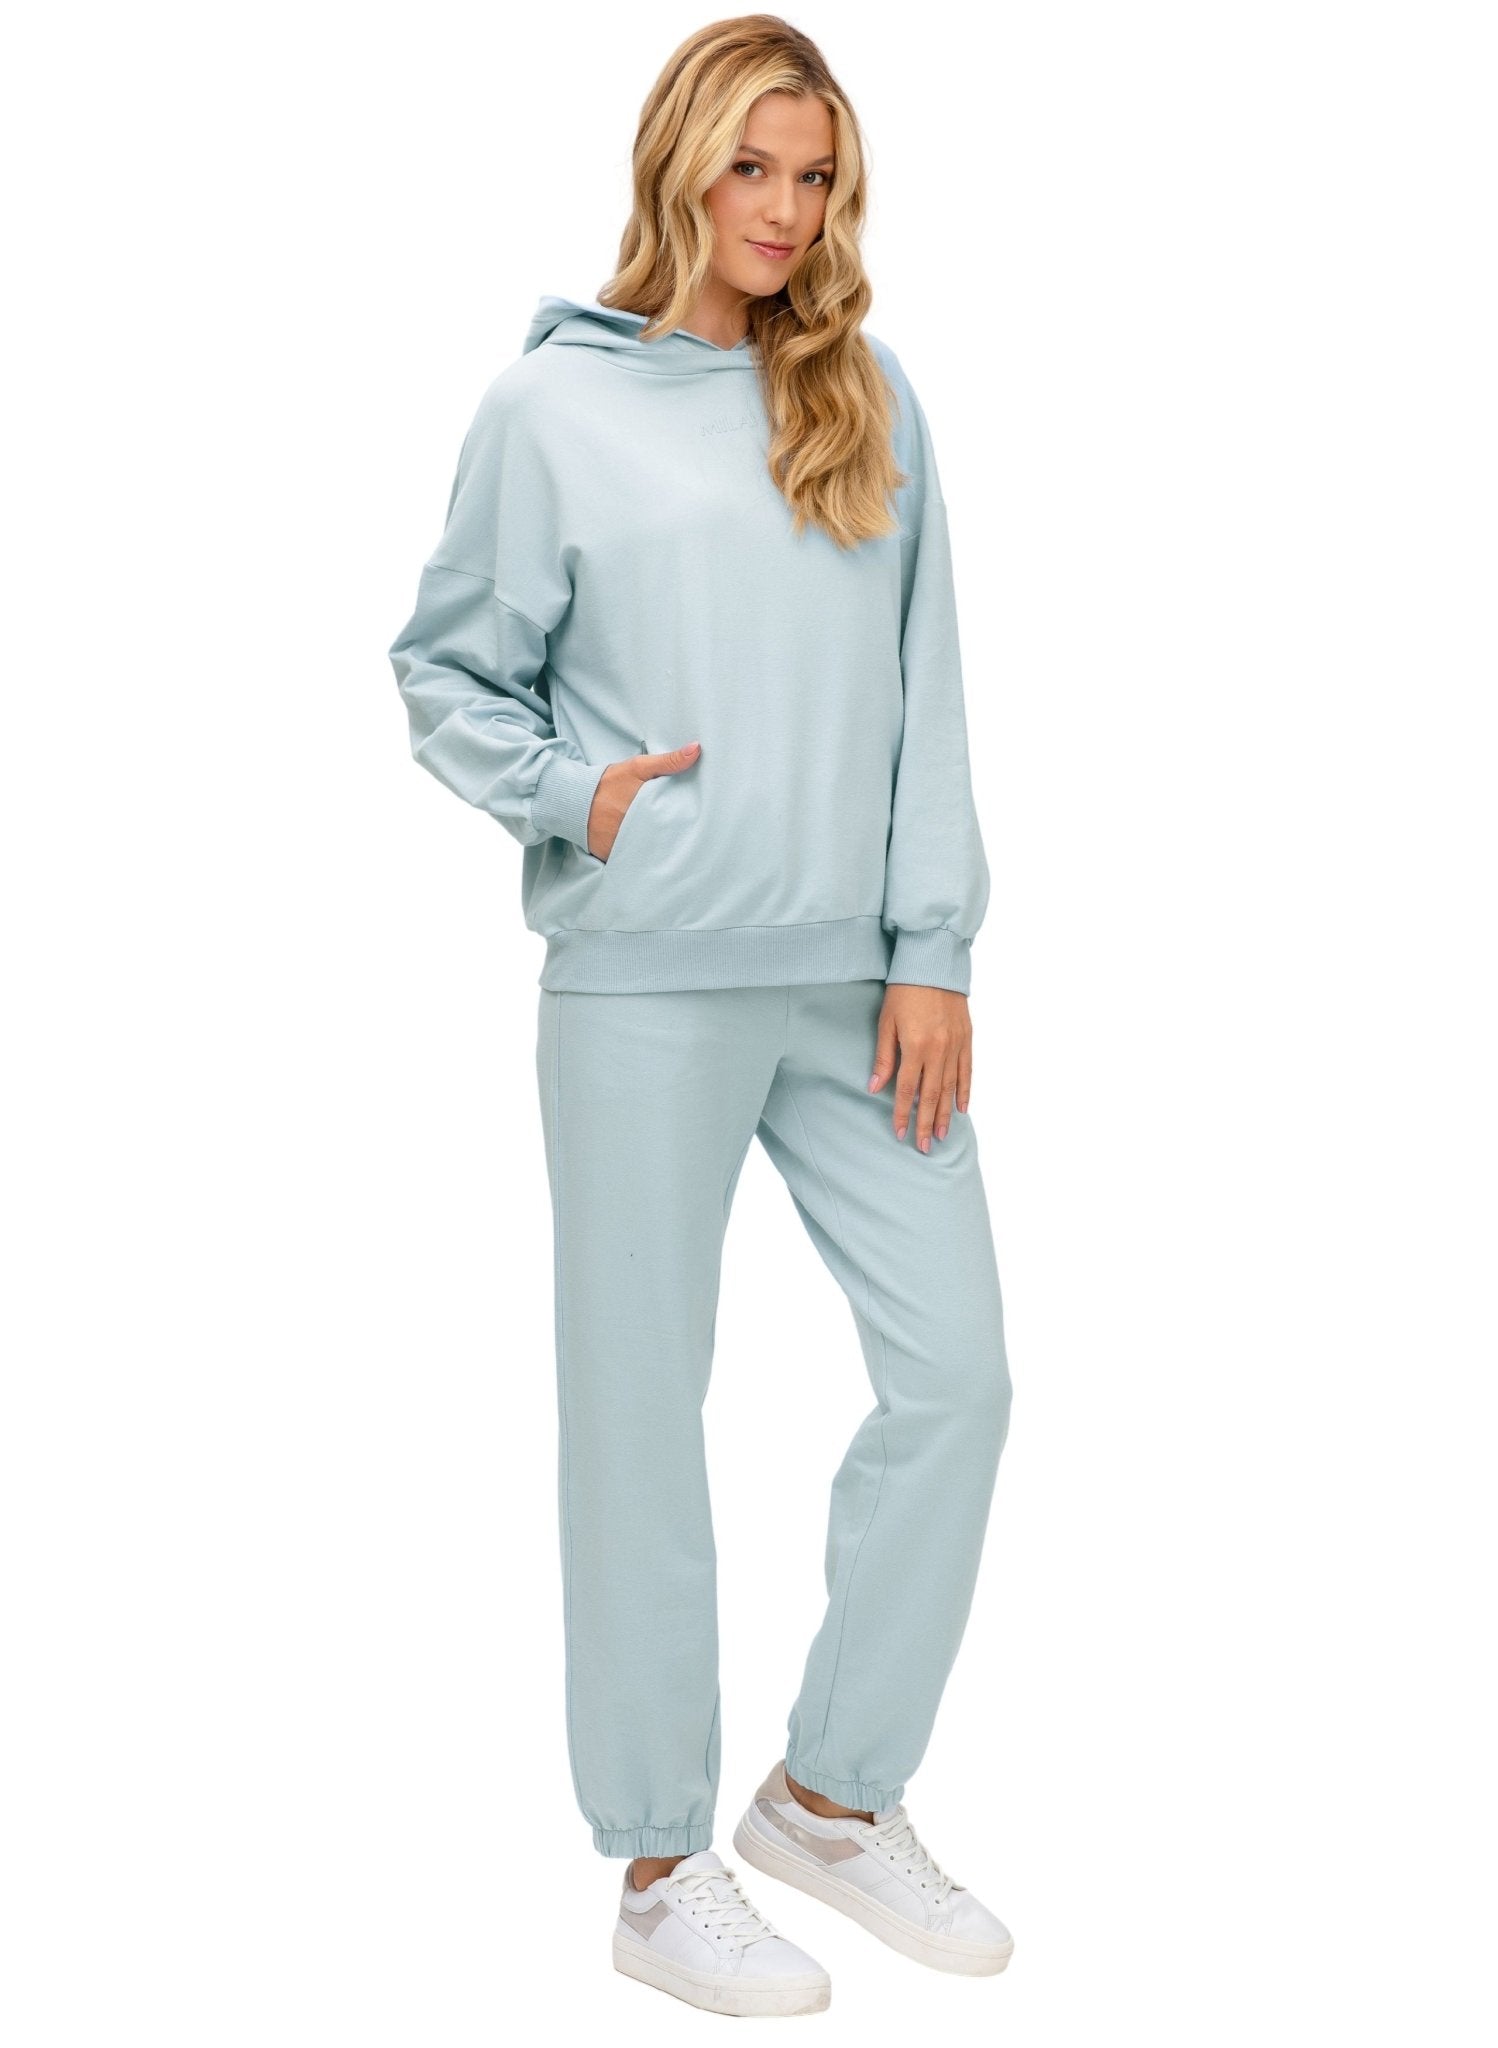 The Cozy Maternity Tracksuit - Milky Mint - Mums and Bumps